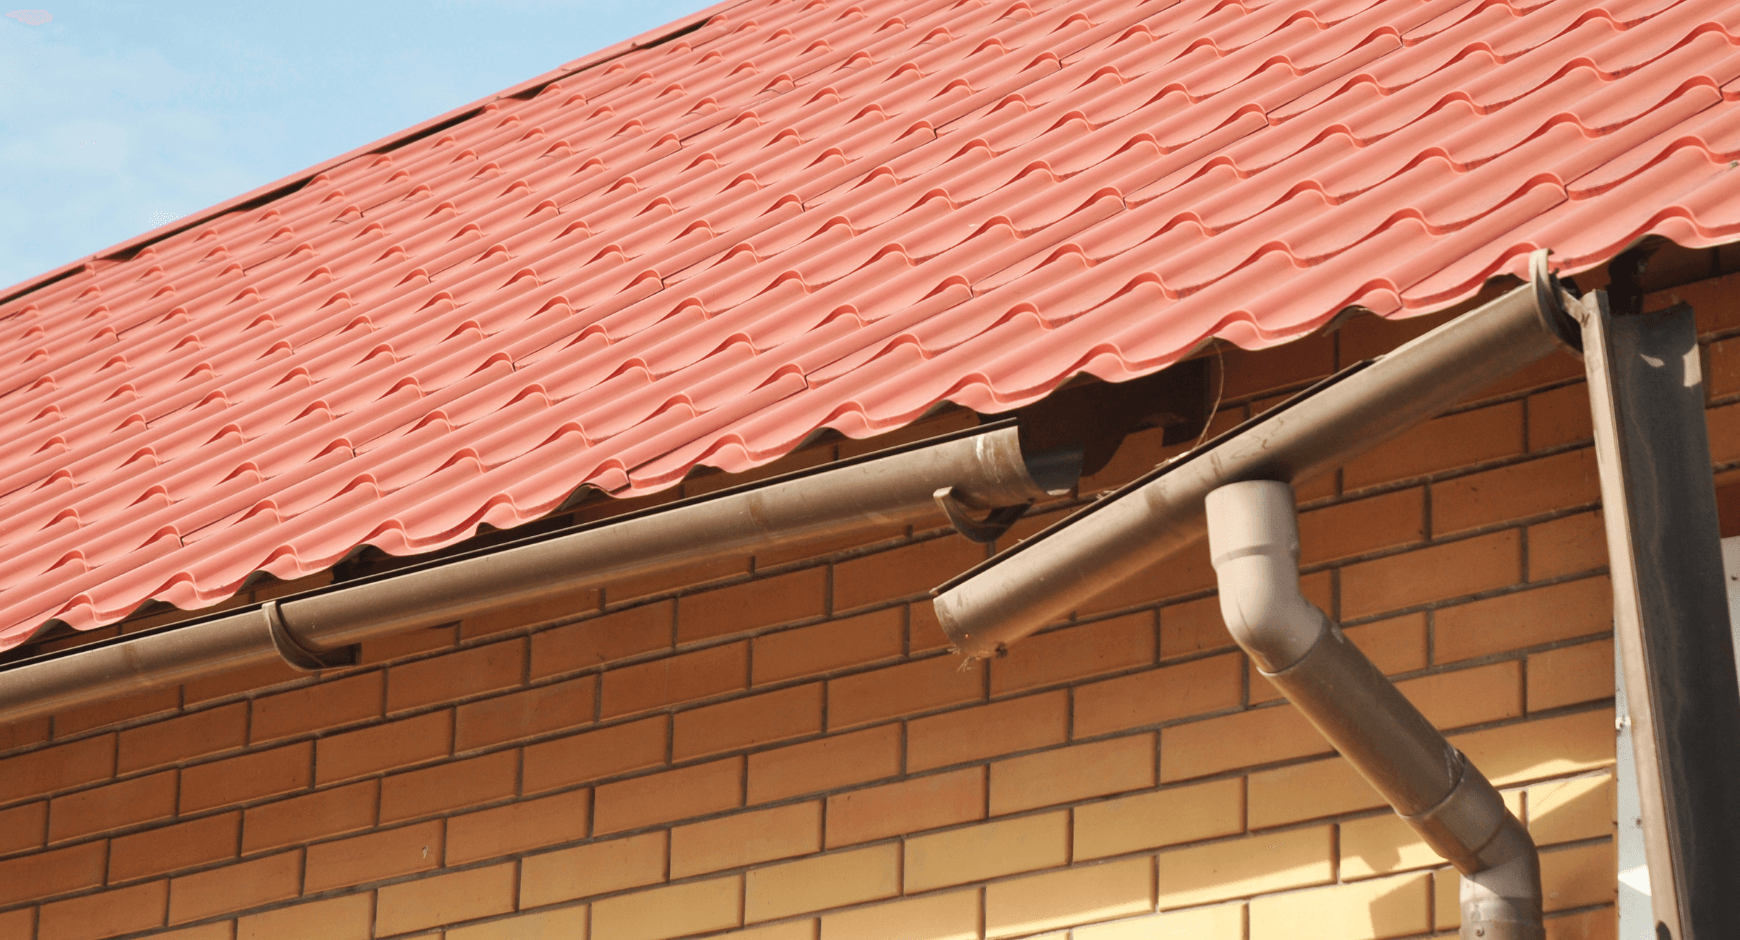 Image of gutters that sagged so badly they broke